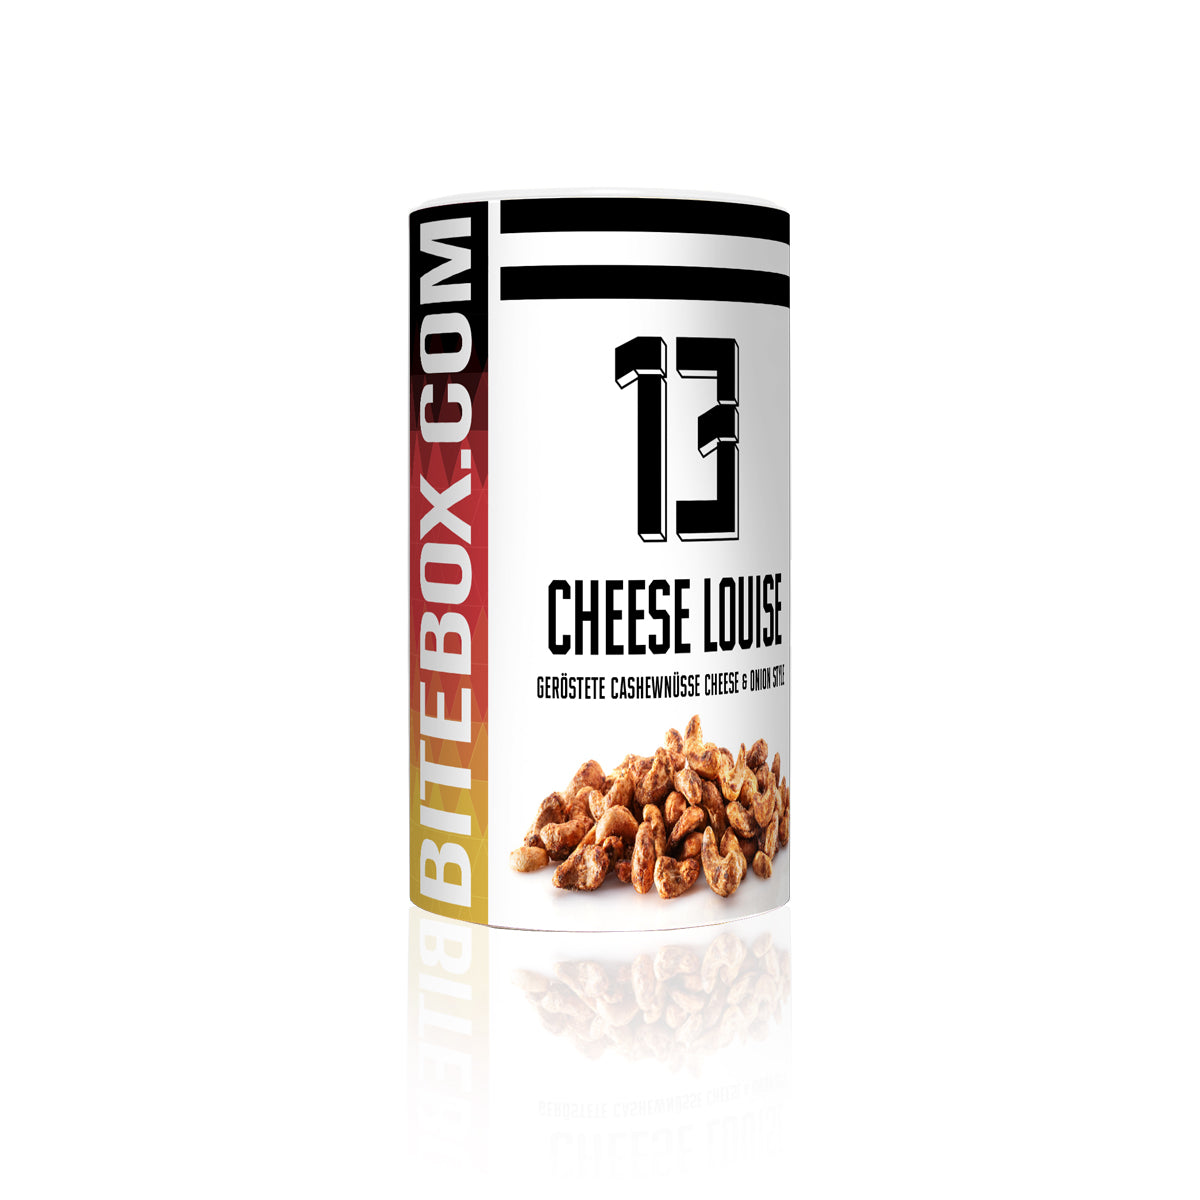 Team-Snack #13 - Cheese Louise